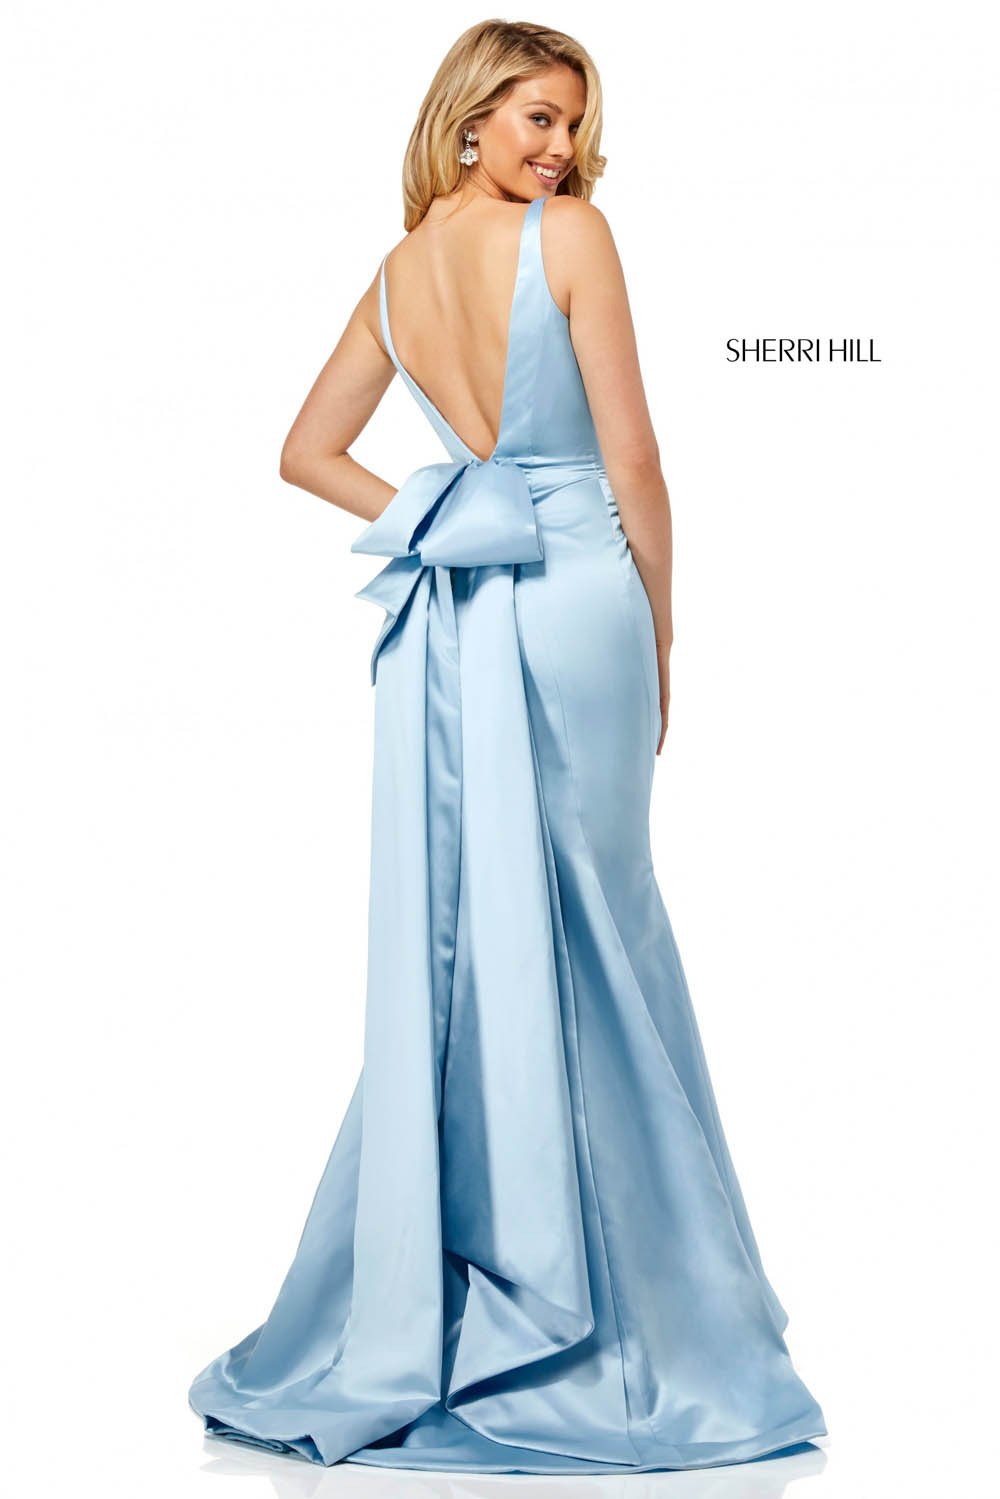 Sherri Hill 52540 dress images in these colors: Berry, Navy, Candy Pink, Ivory, Emerald, Dark Nude, Red, Royal, Light Blue, Blush, Yellow.